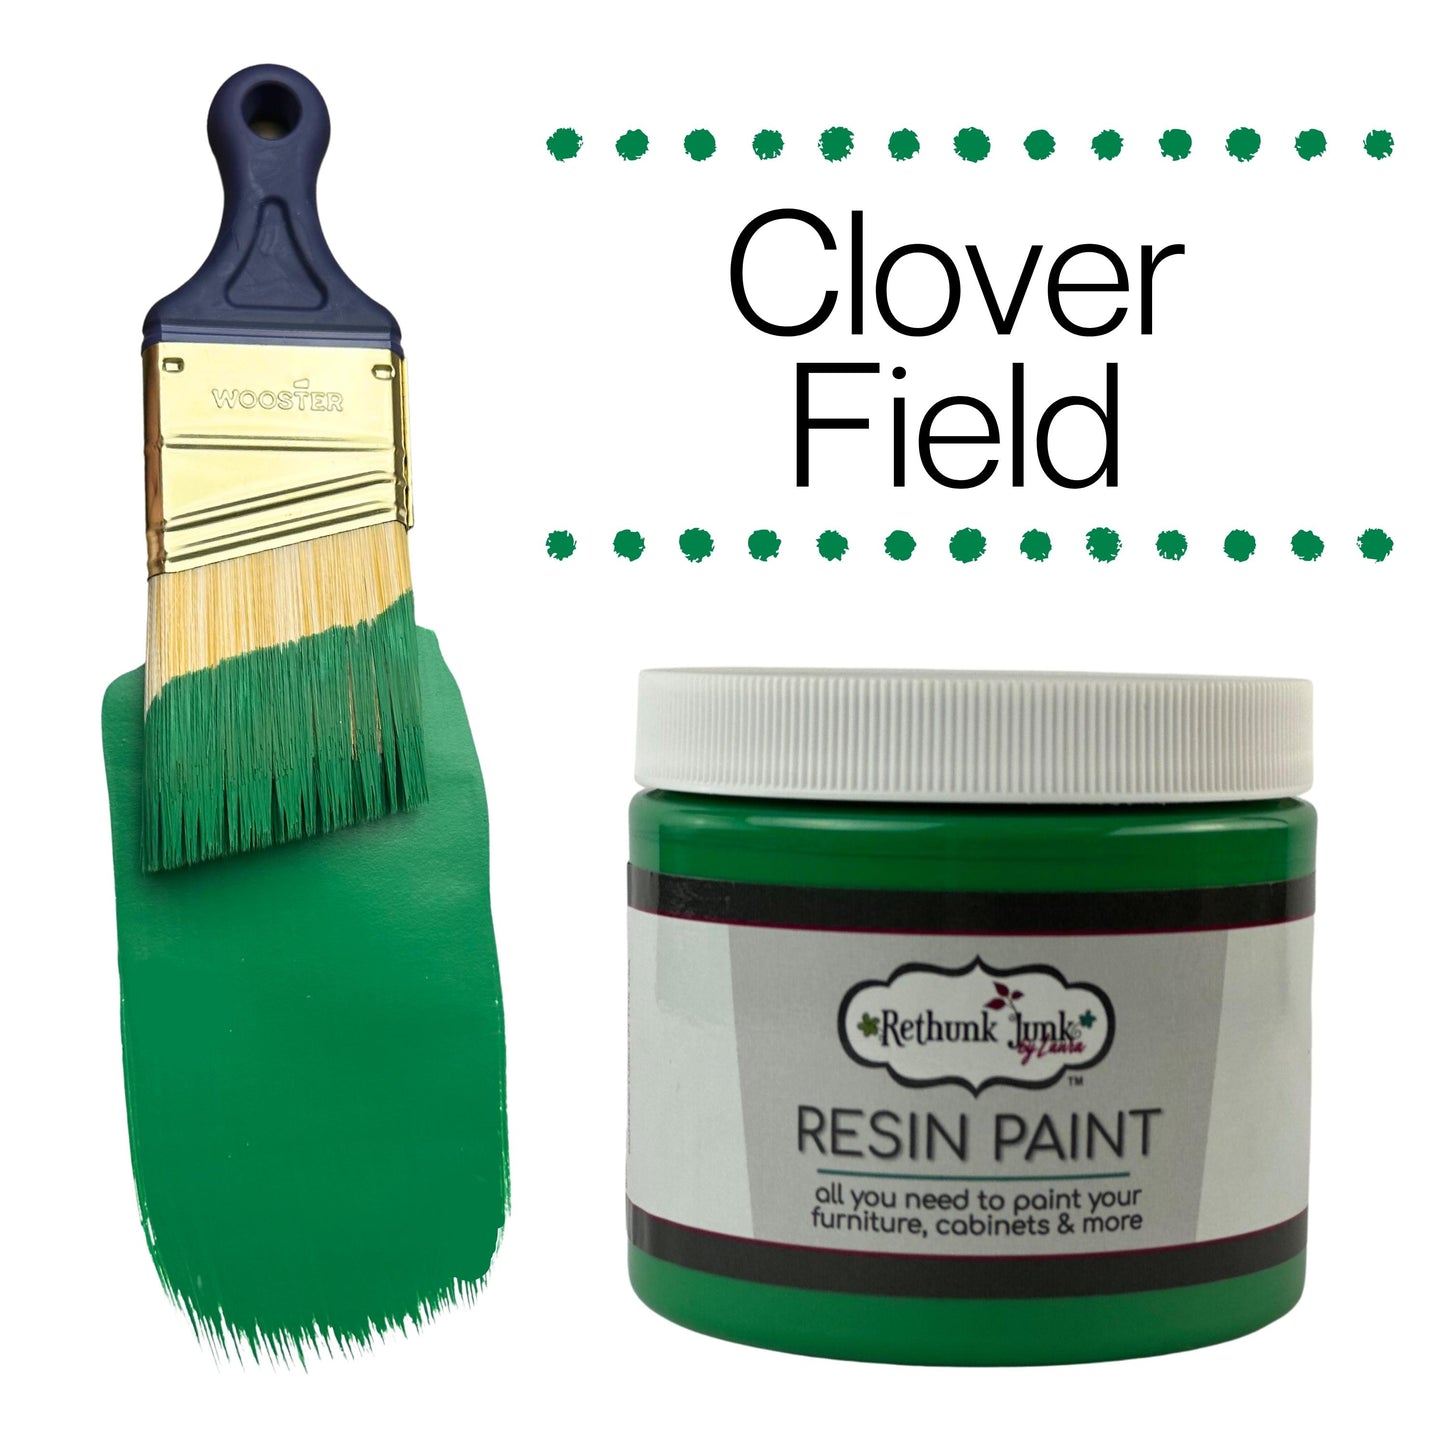 Rethunk Junk Resin Paint in Clover Field